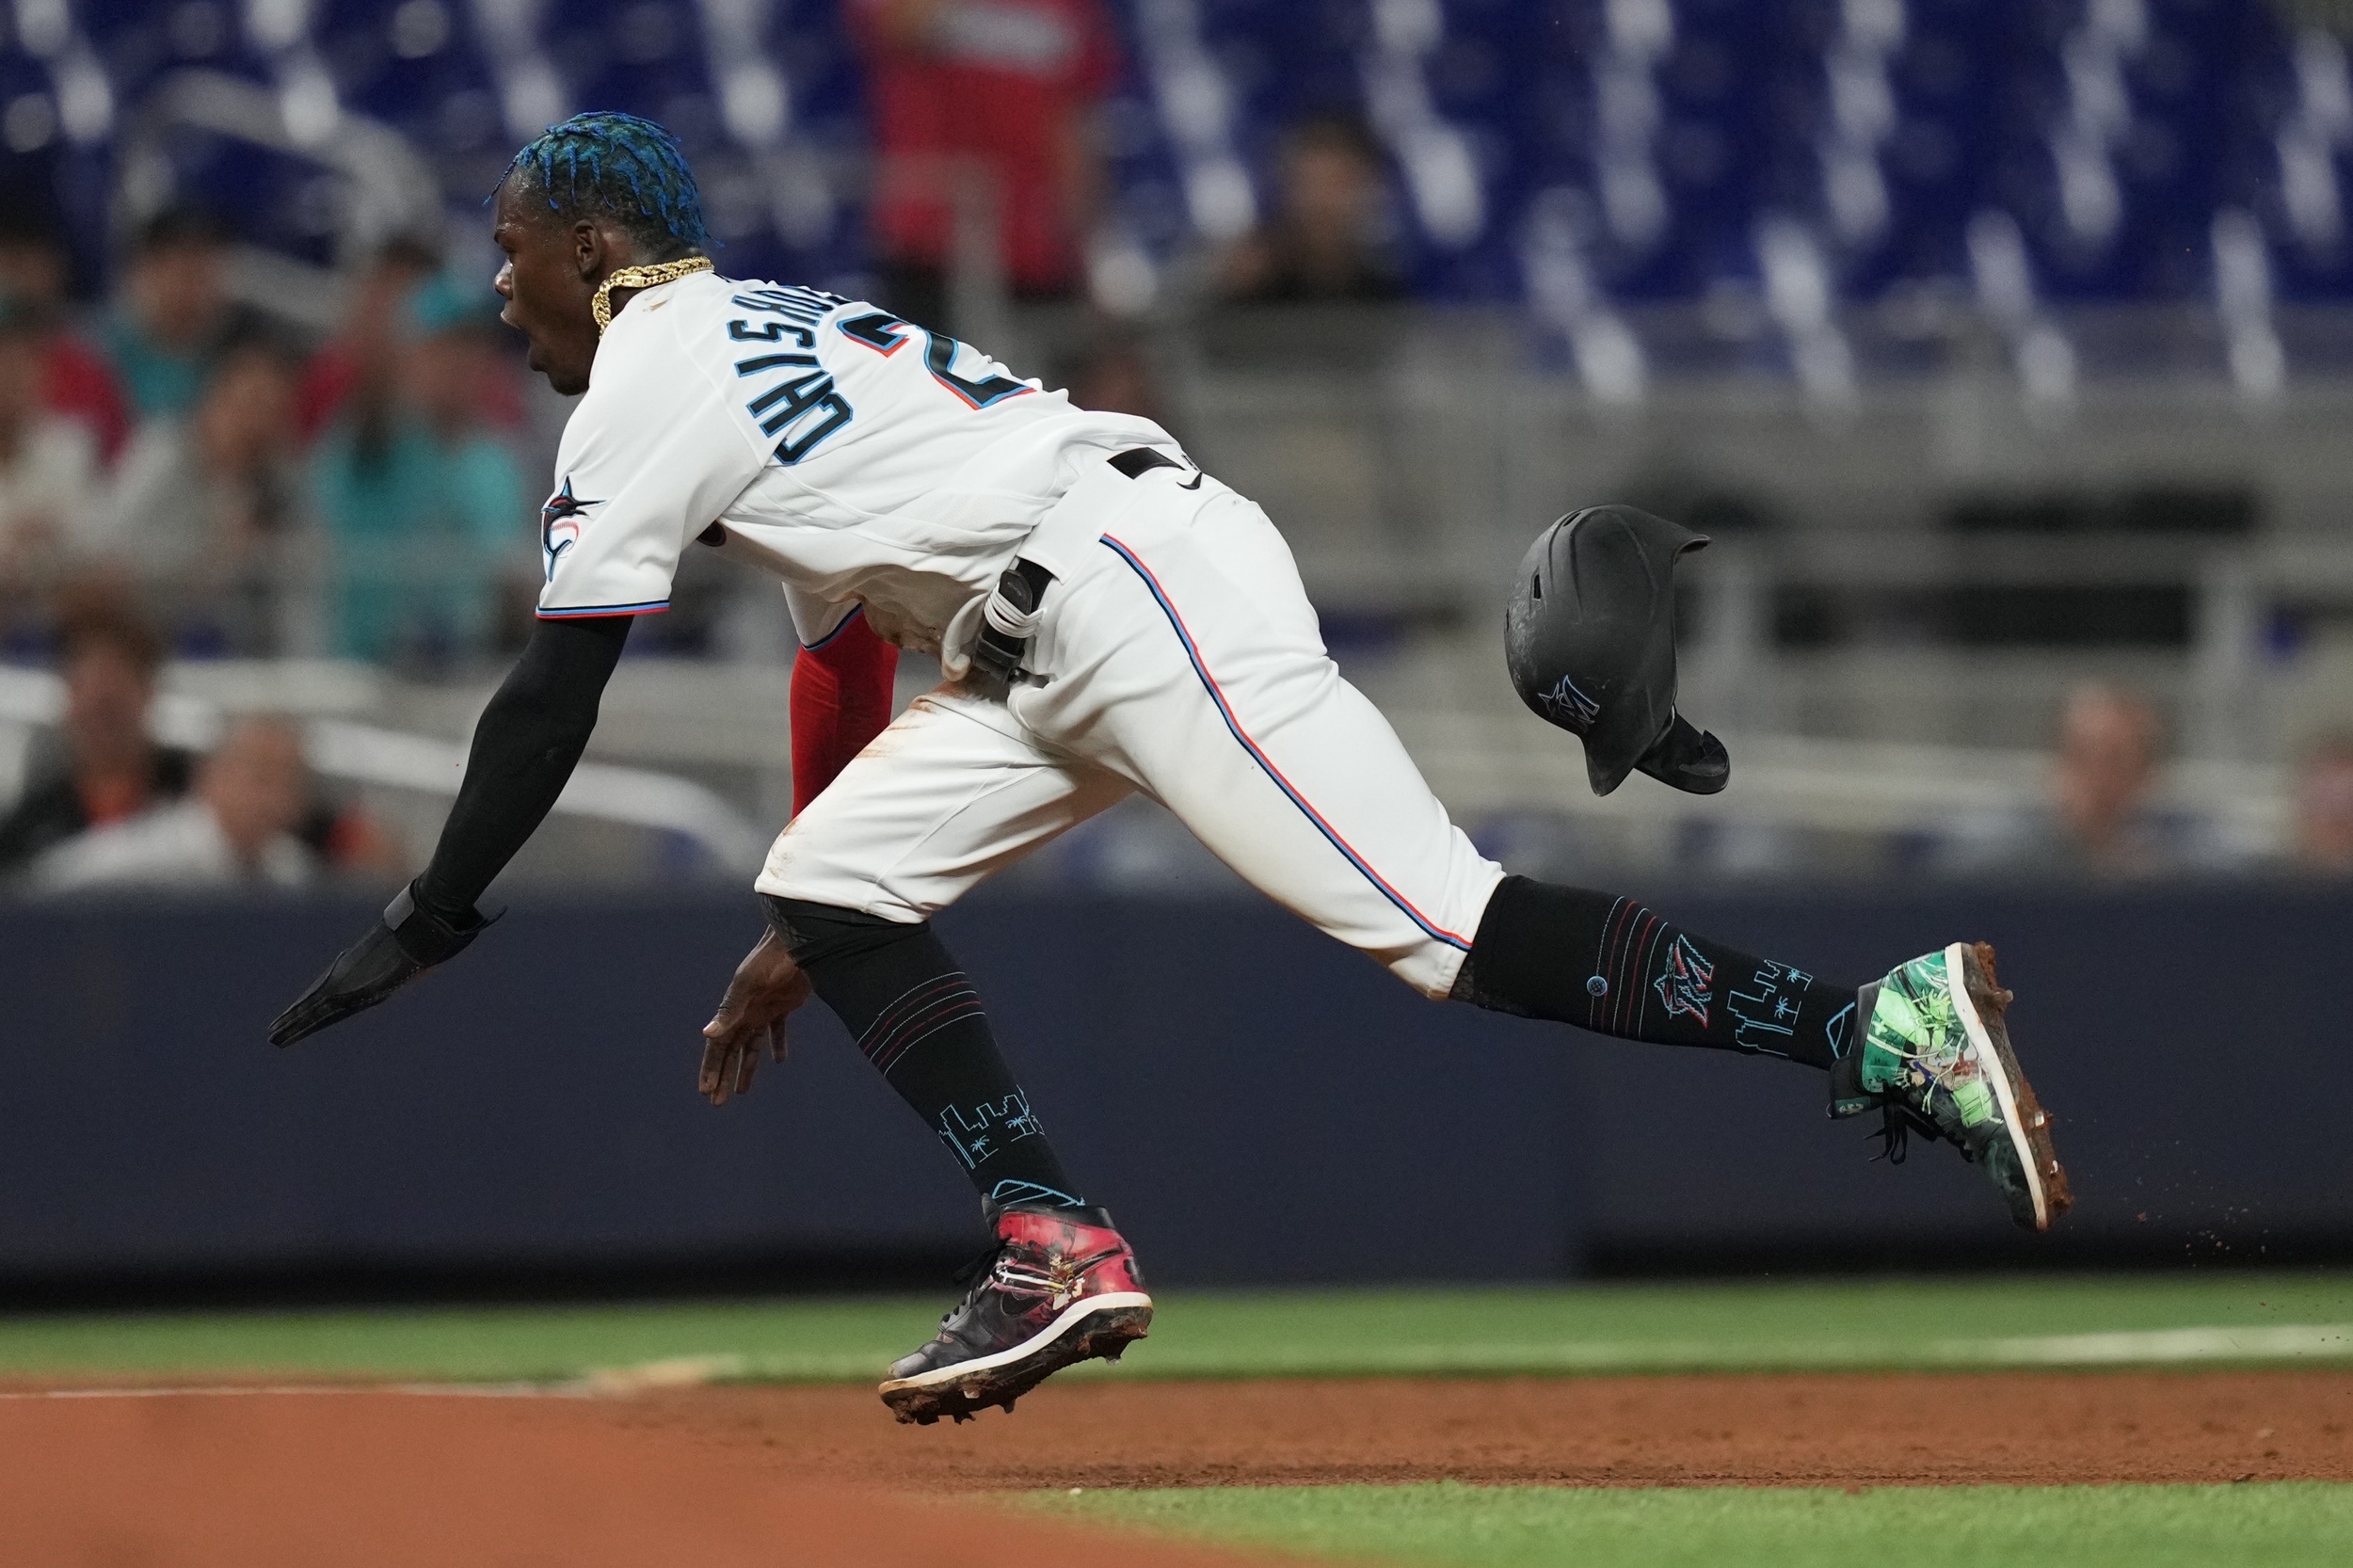 Foot bruise may land Braves' Ronald Acuna Jr. back on IL